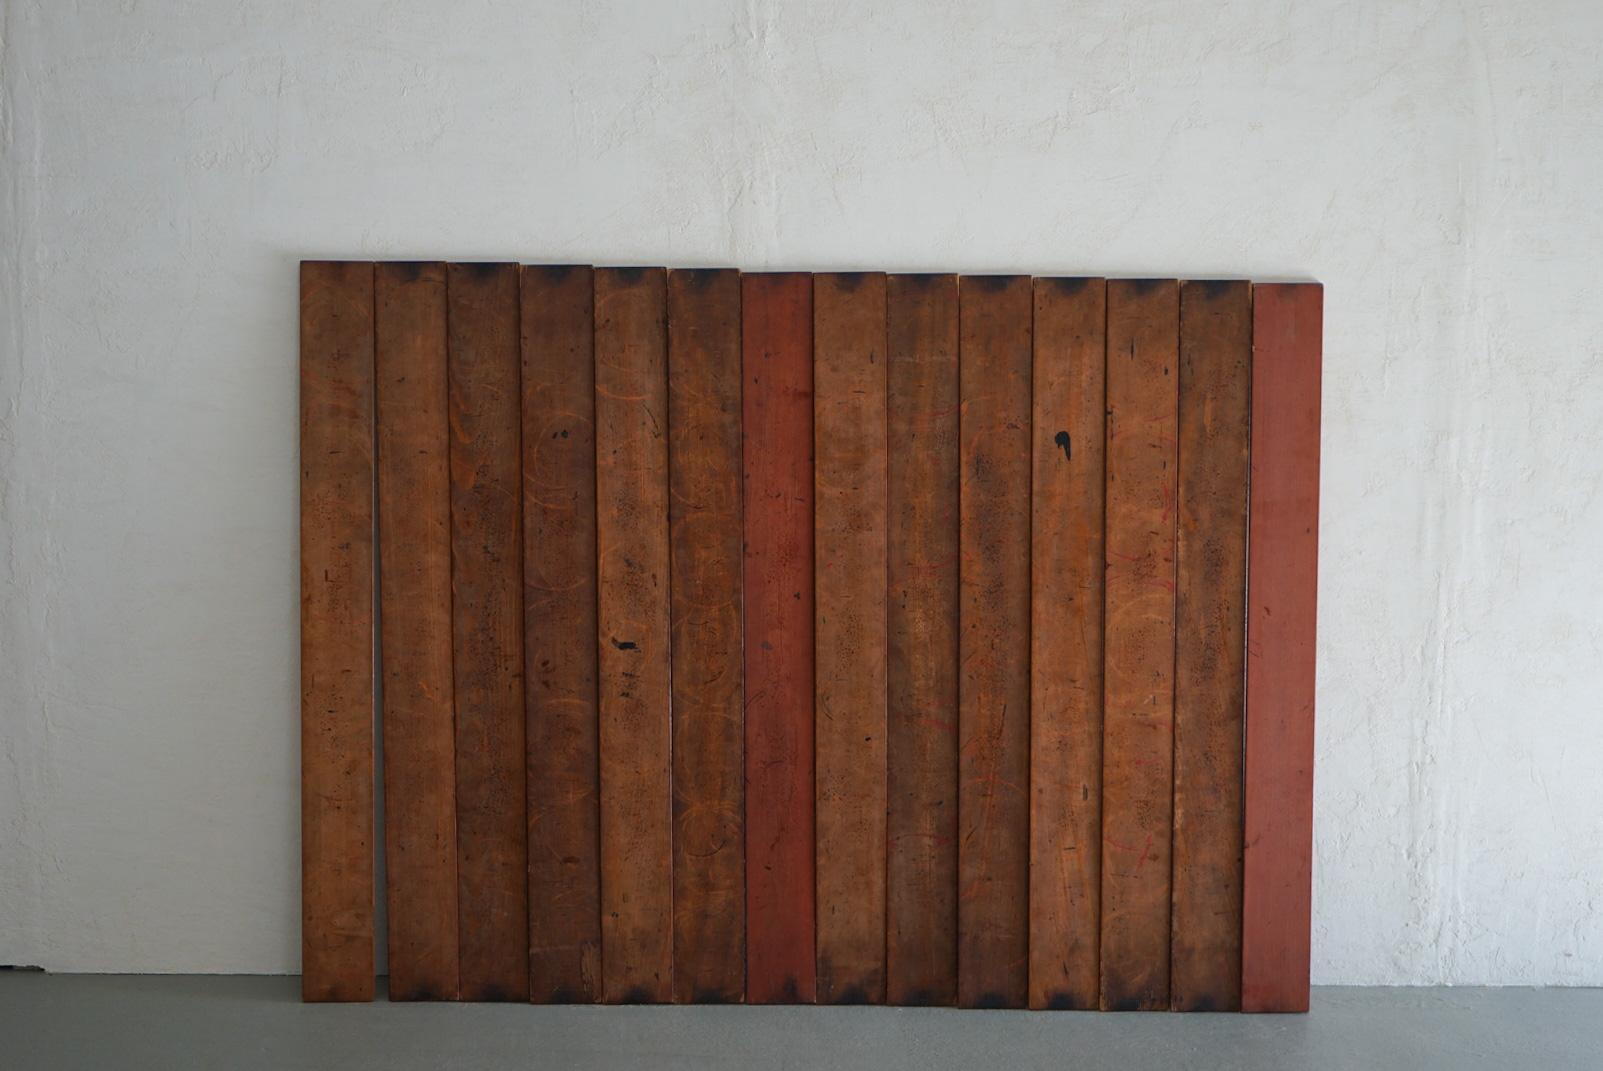 This is an old Japanese work board.
This board is used by lacquer craftsmen to dry their bowls after applying lacquer.
Therefore, there are countless traces of lacquer.
It is an accidental beauty created without the creation of nature.
It would be